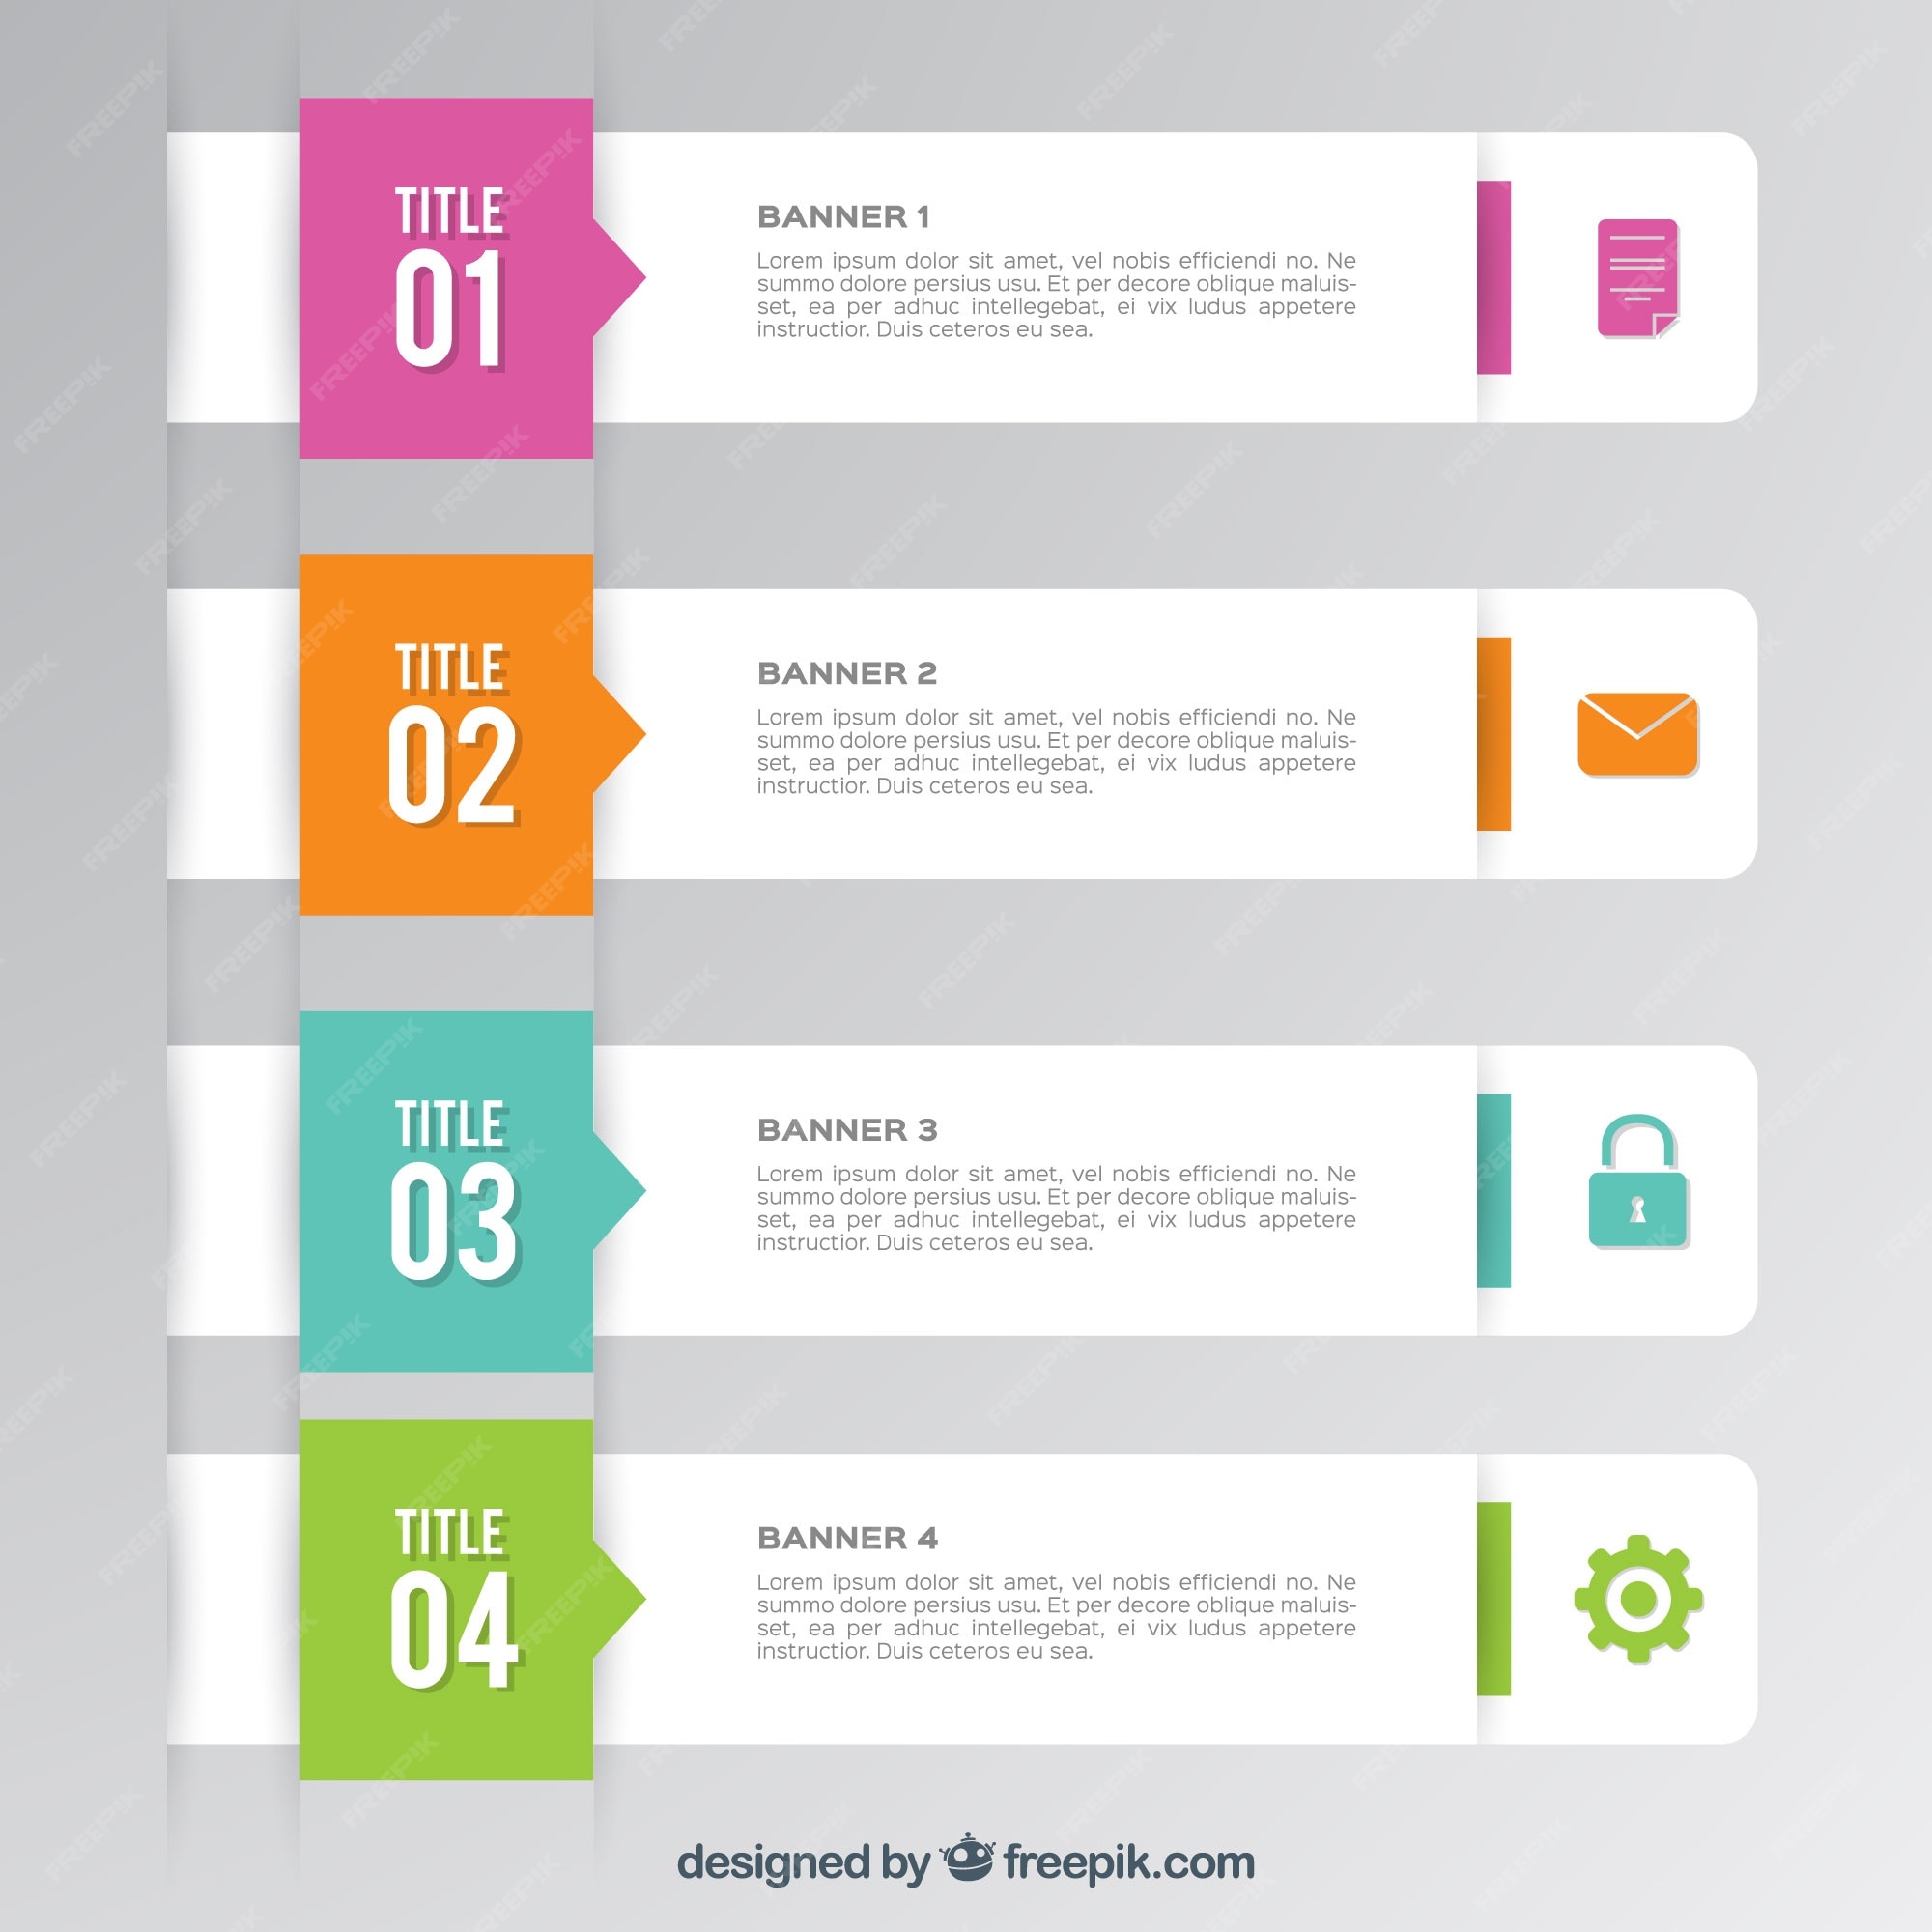 Free Vector Several Infographic Banners With Colored Elements